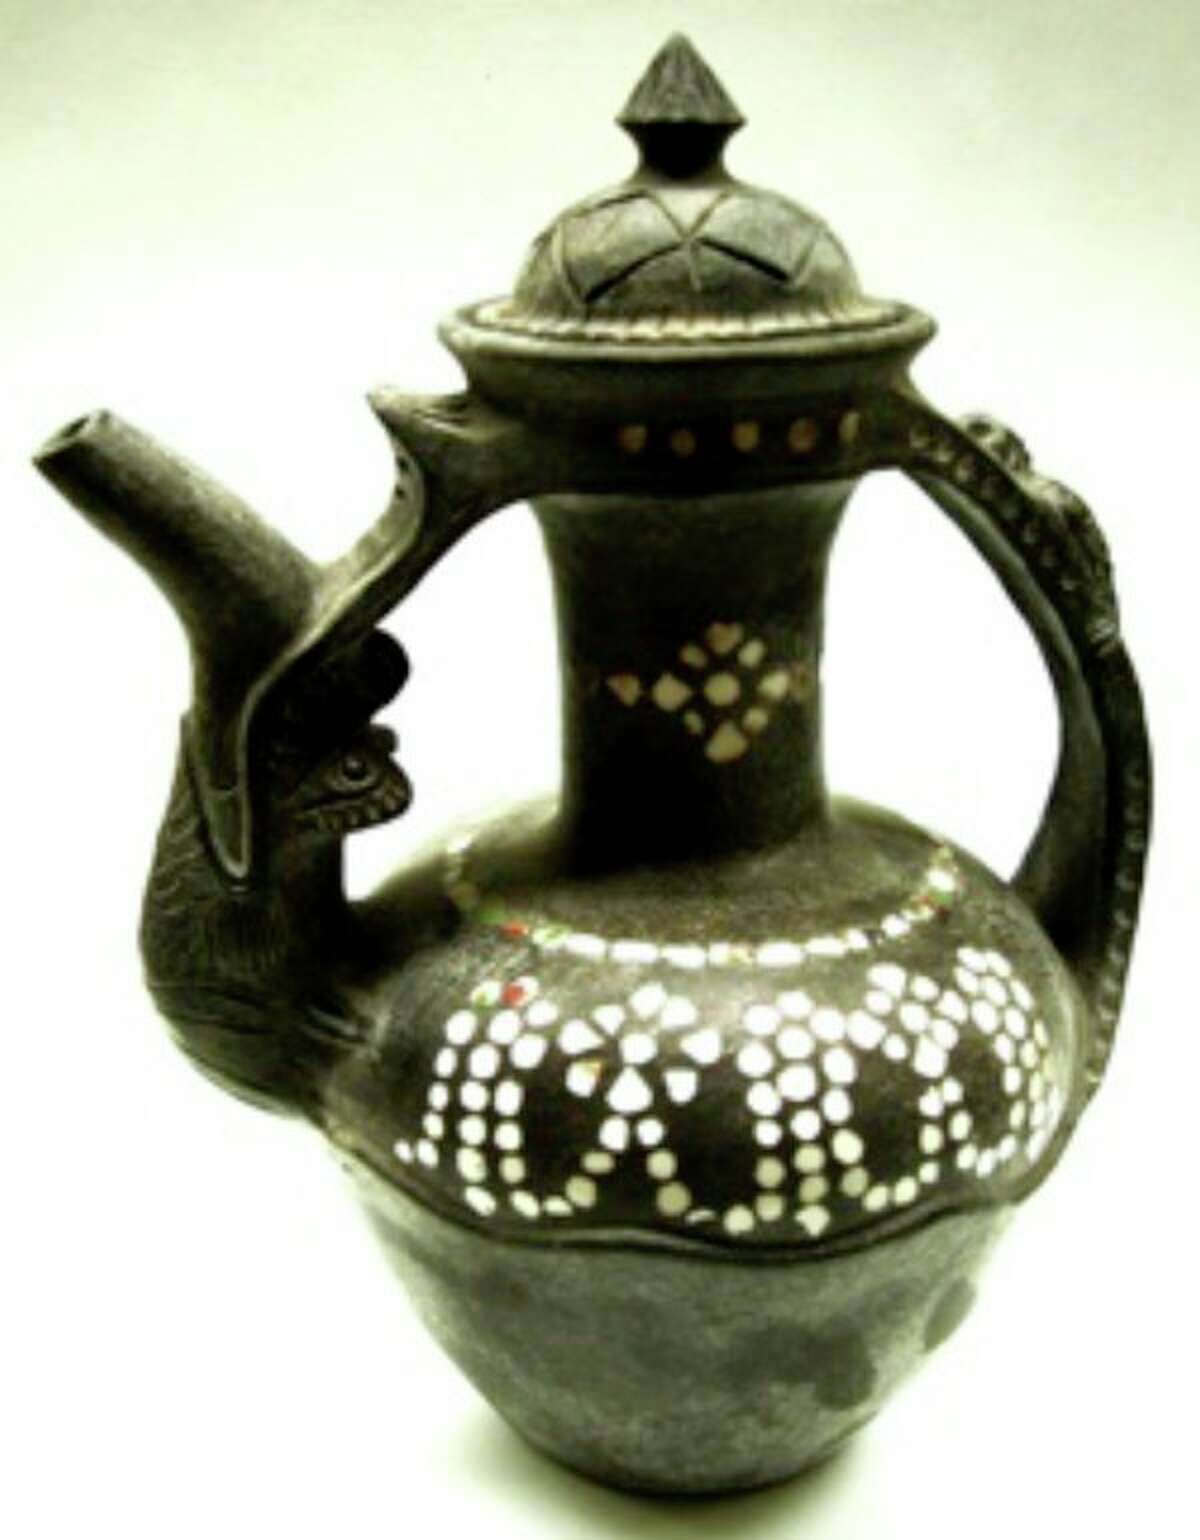 Yunnan-Tibetan Yak teapot, part of 'Chinese Folk Pottery, The Art of the Everyday,' exhibit at Marshall M. Fredericks Sculpture Museum, located on the campus of Saginaw Valley State University 